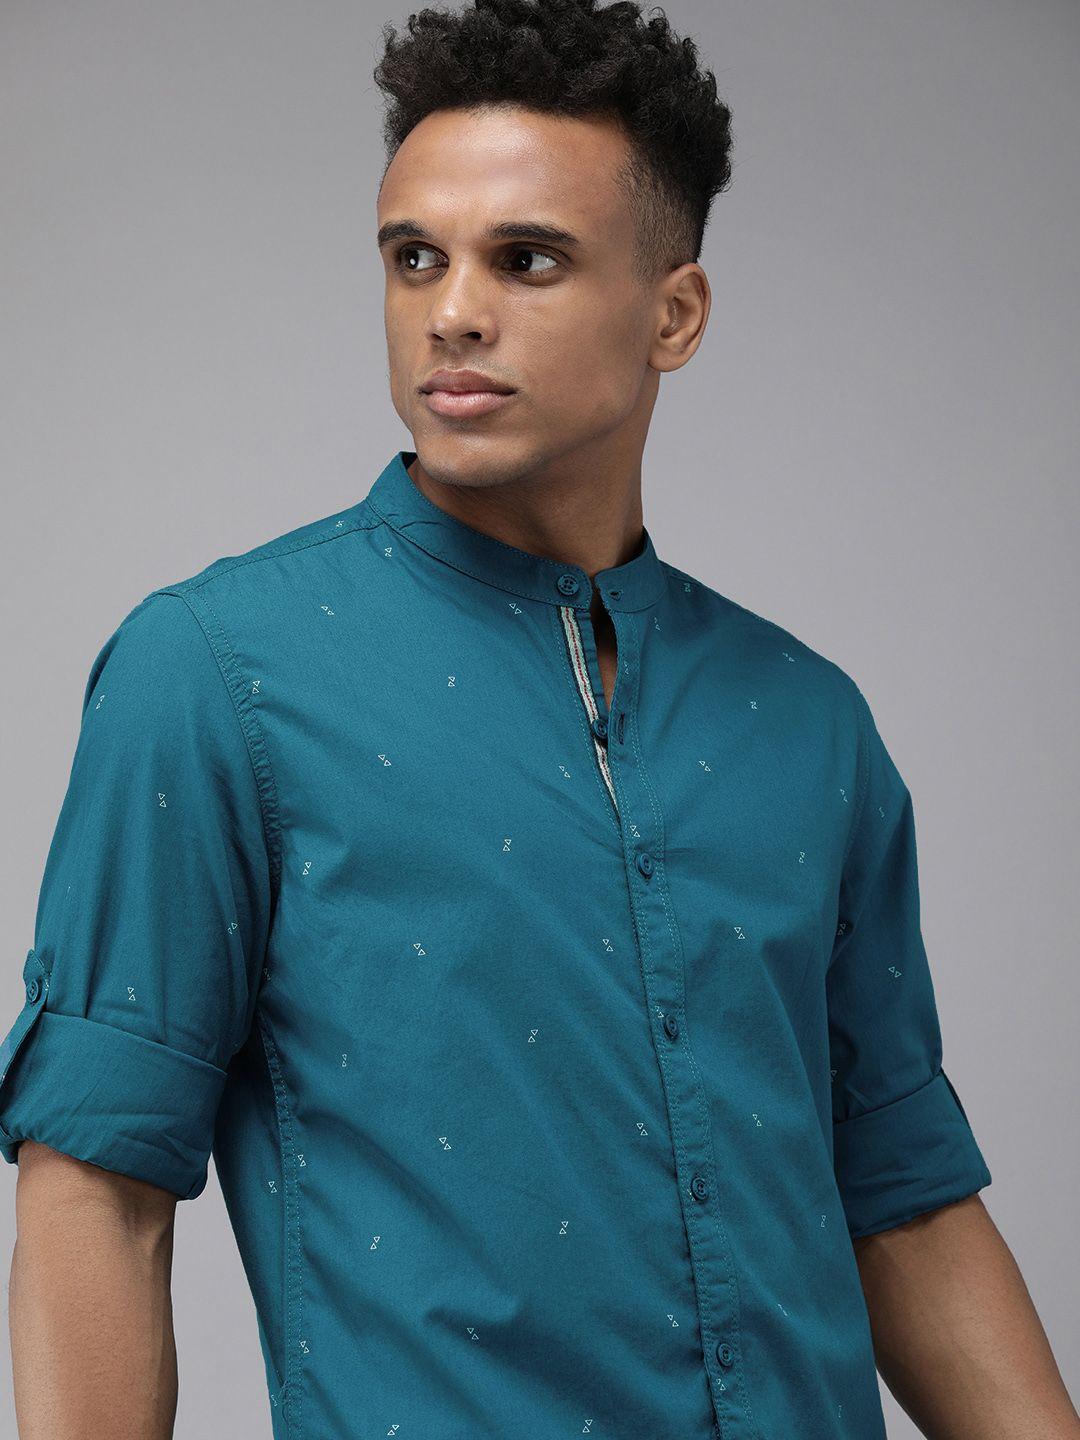 the-roadster-lifestyle-co-men-teal-blue-printed-casual-shirt